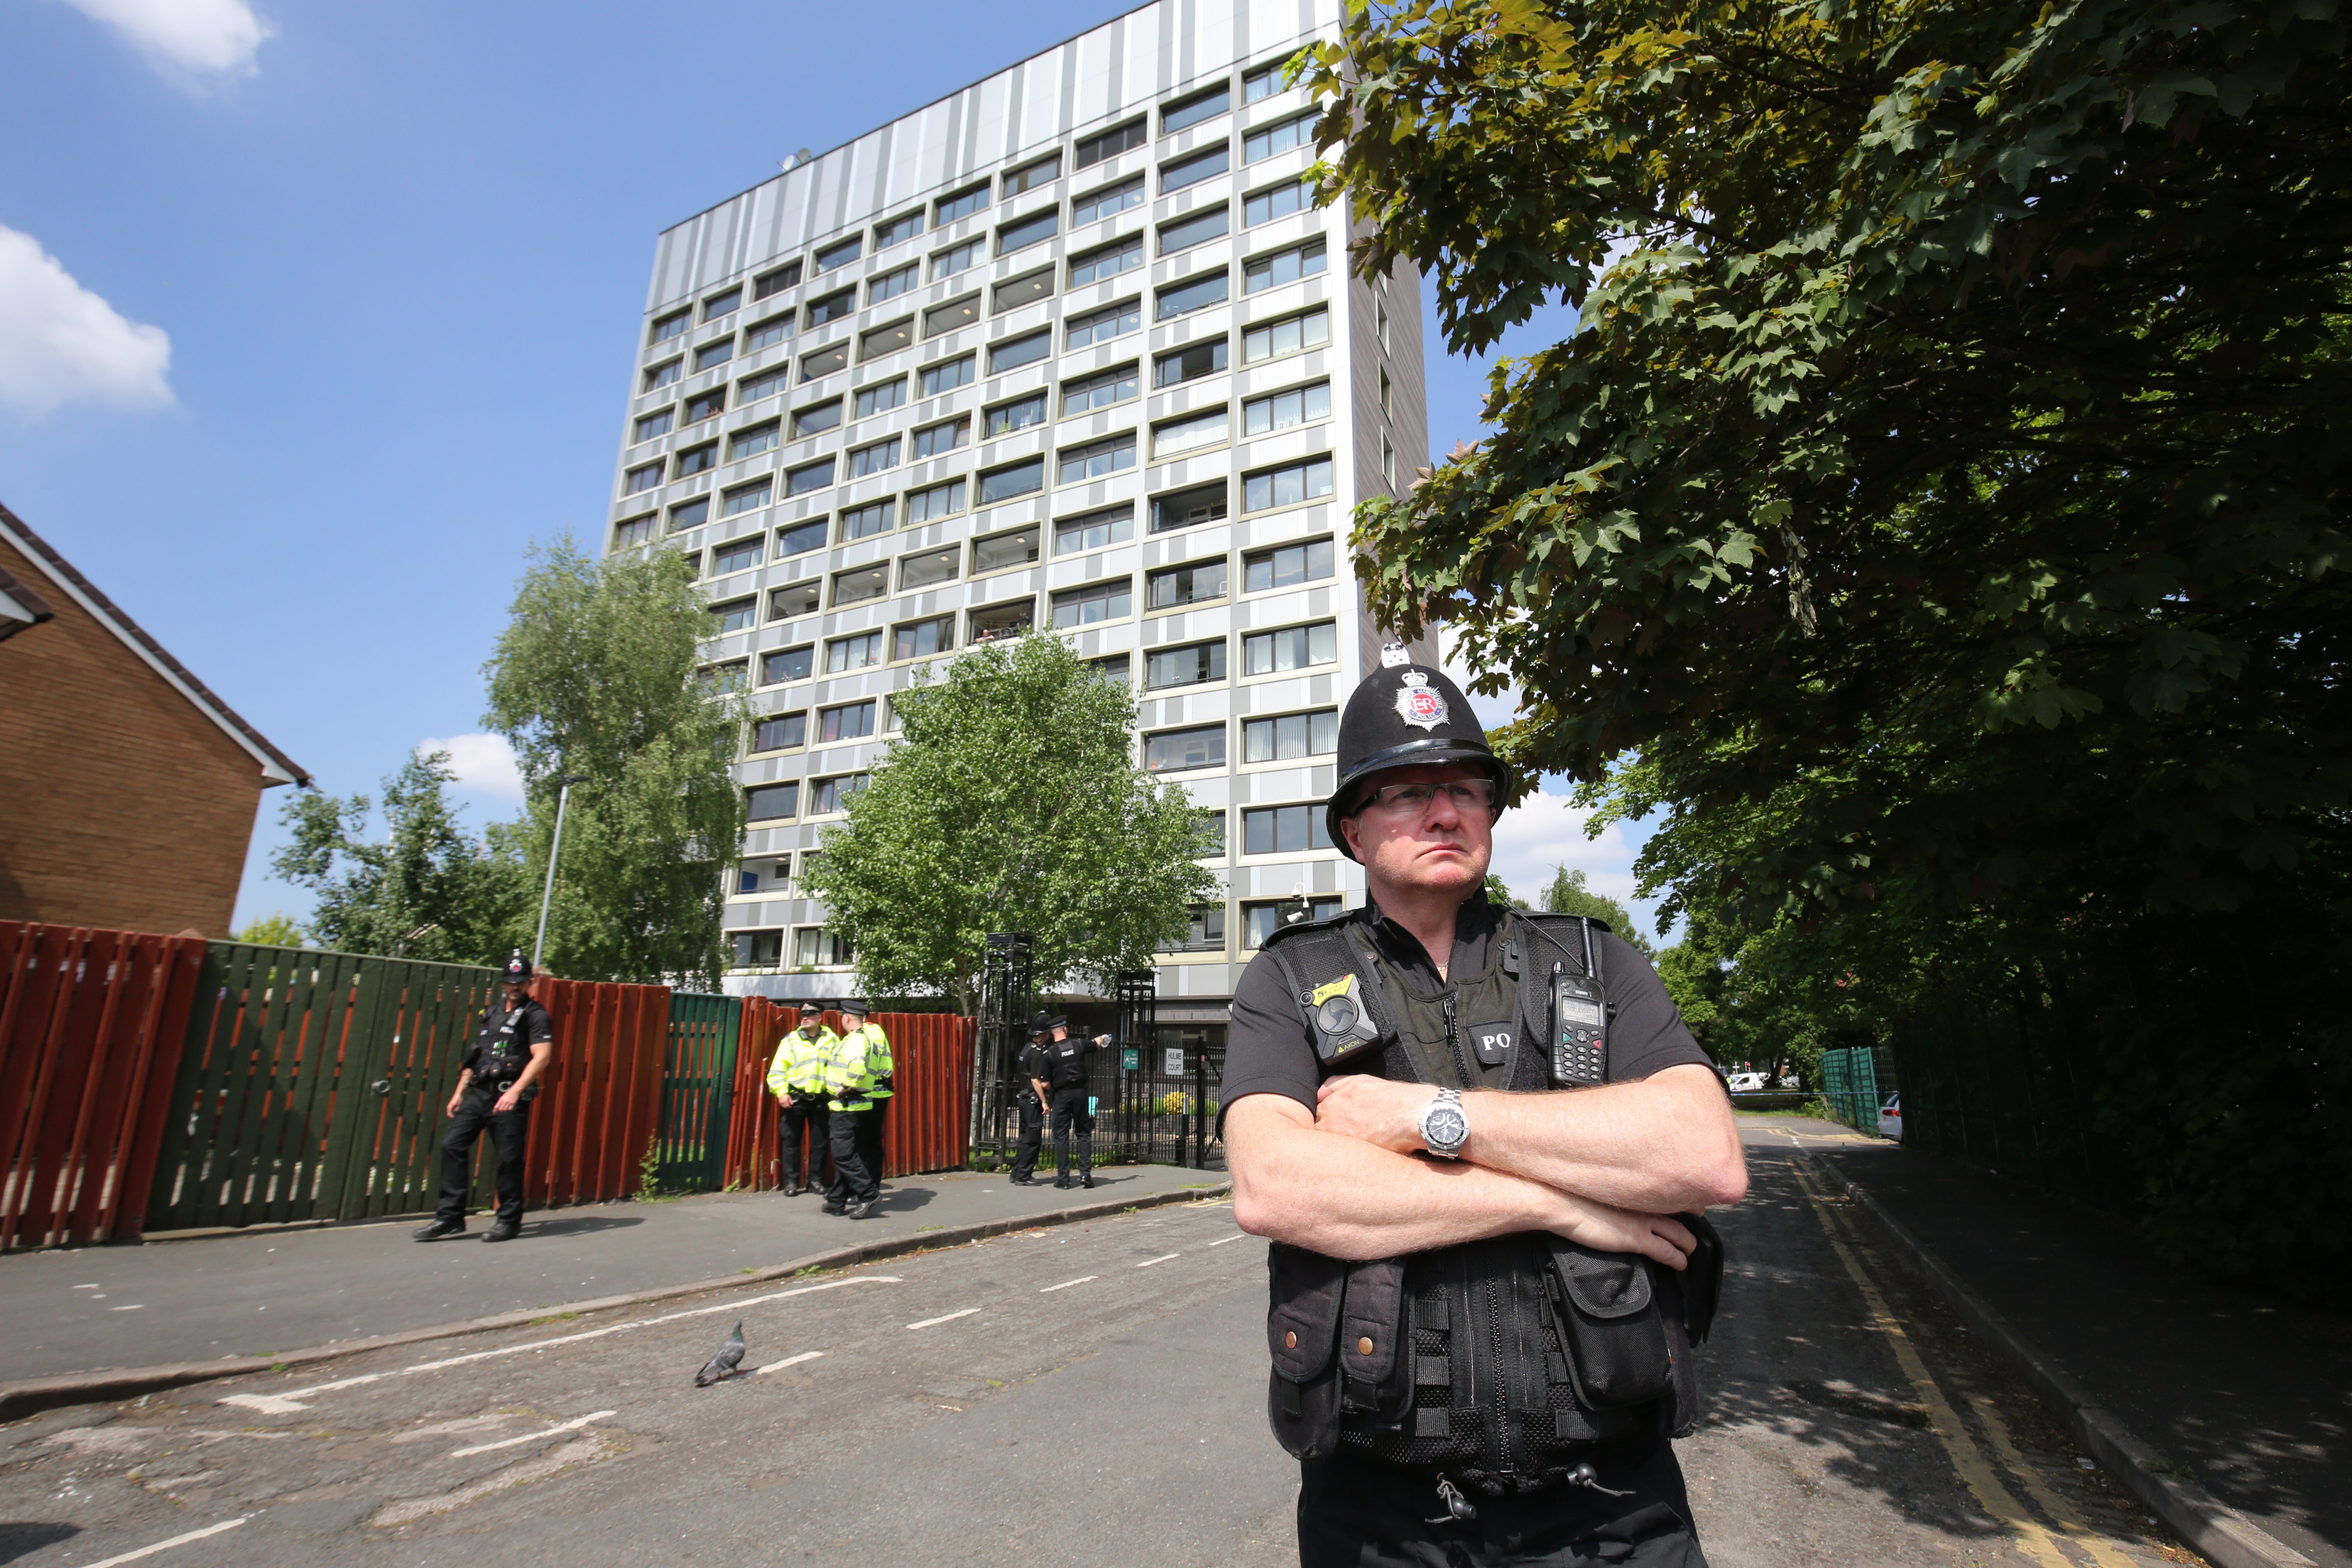 Police seal off Lindy Road, Hulme Manchester as the Manchester attack investigation continues on May 25, 2017 in Manchester, England. (Christopher Furlong—Getty Images)